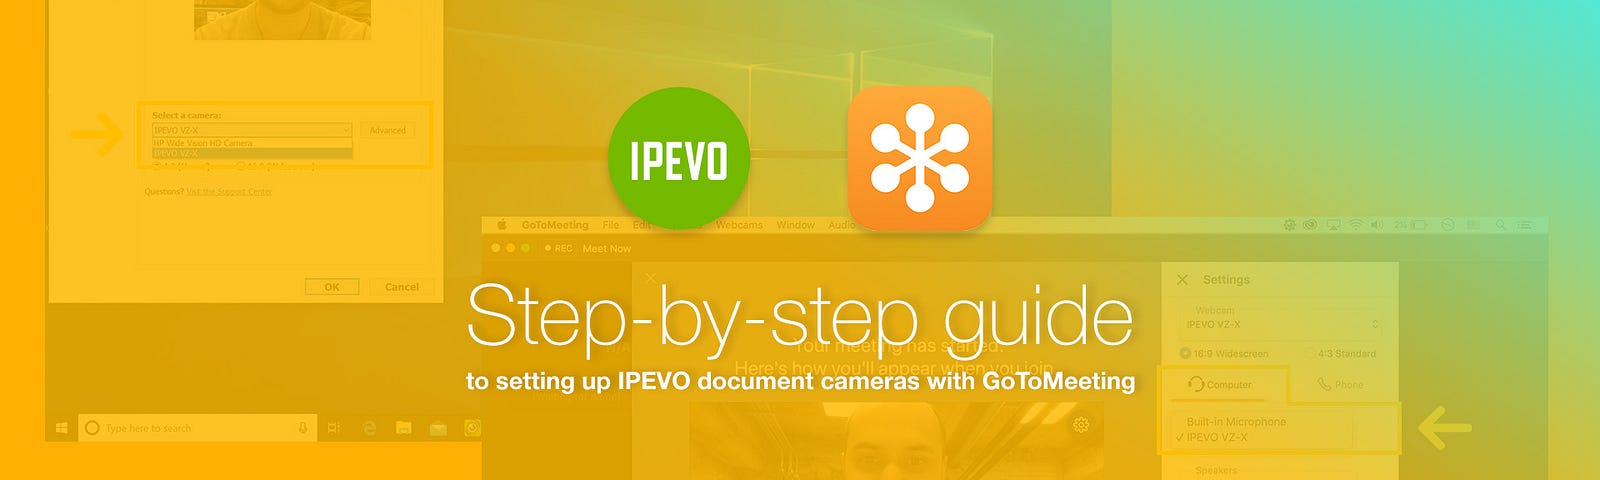 Step-by-step guide to setting up IPEVO document cameras with GoToMeeting